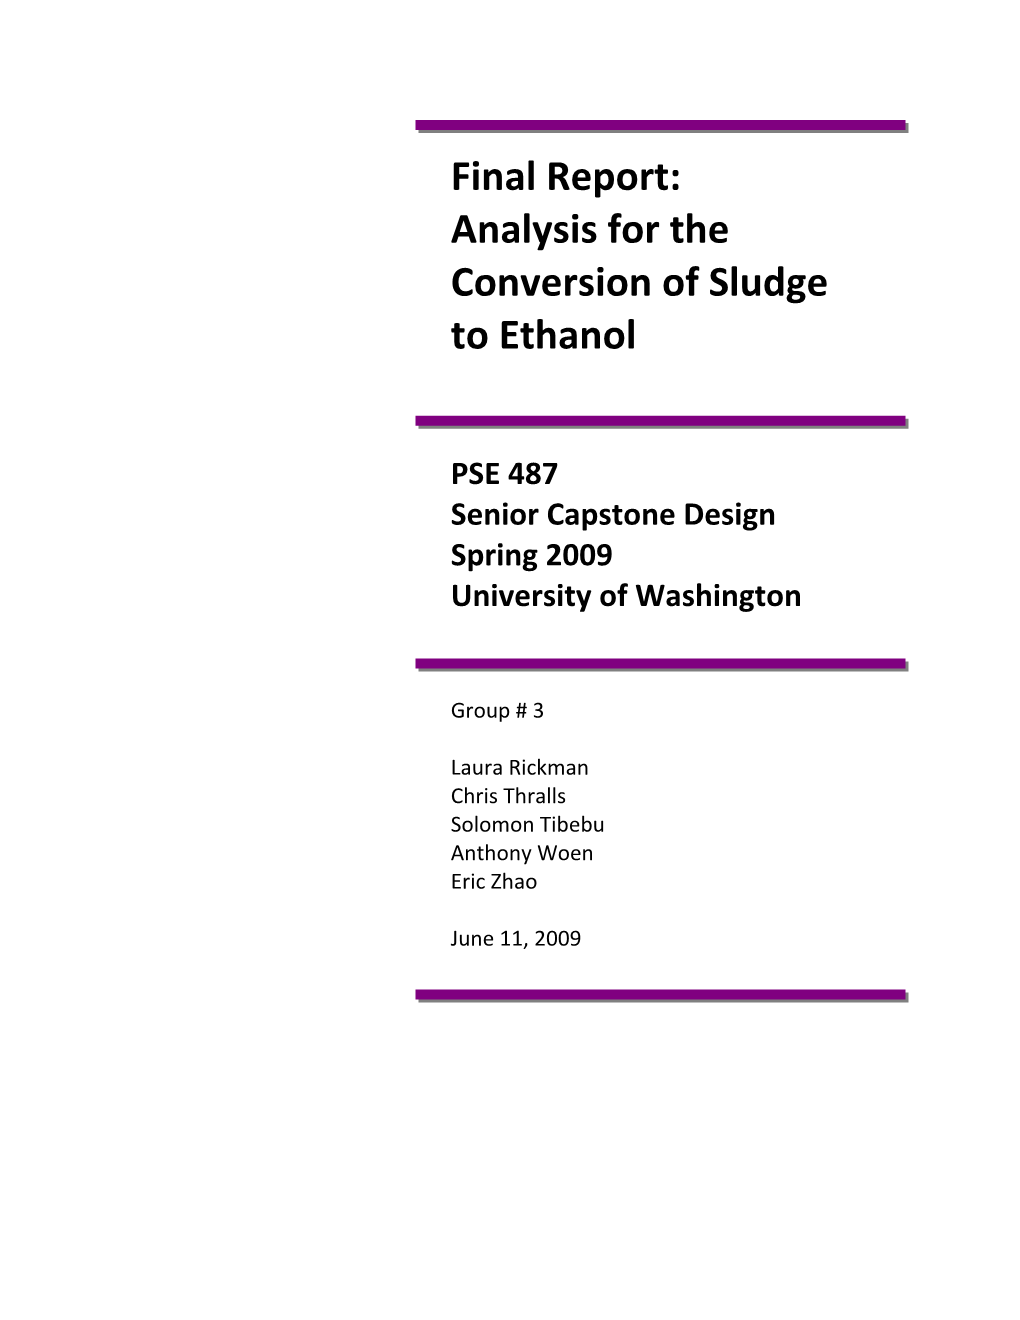 Analysis for the Conversion of Sludge to Ethanol